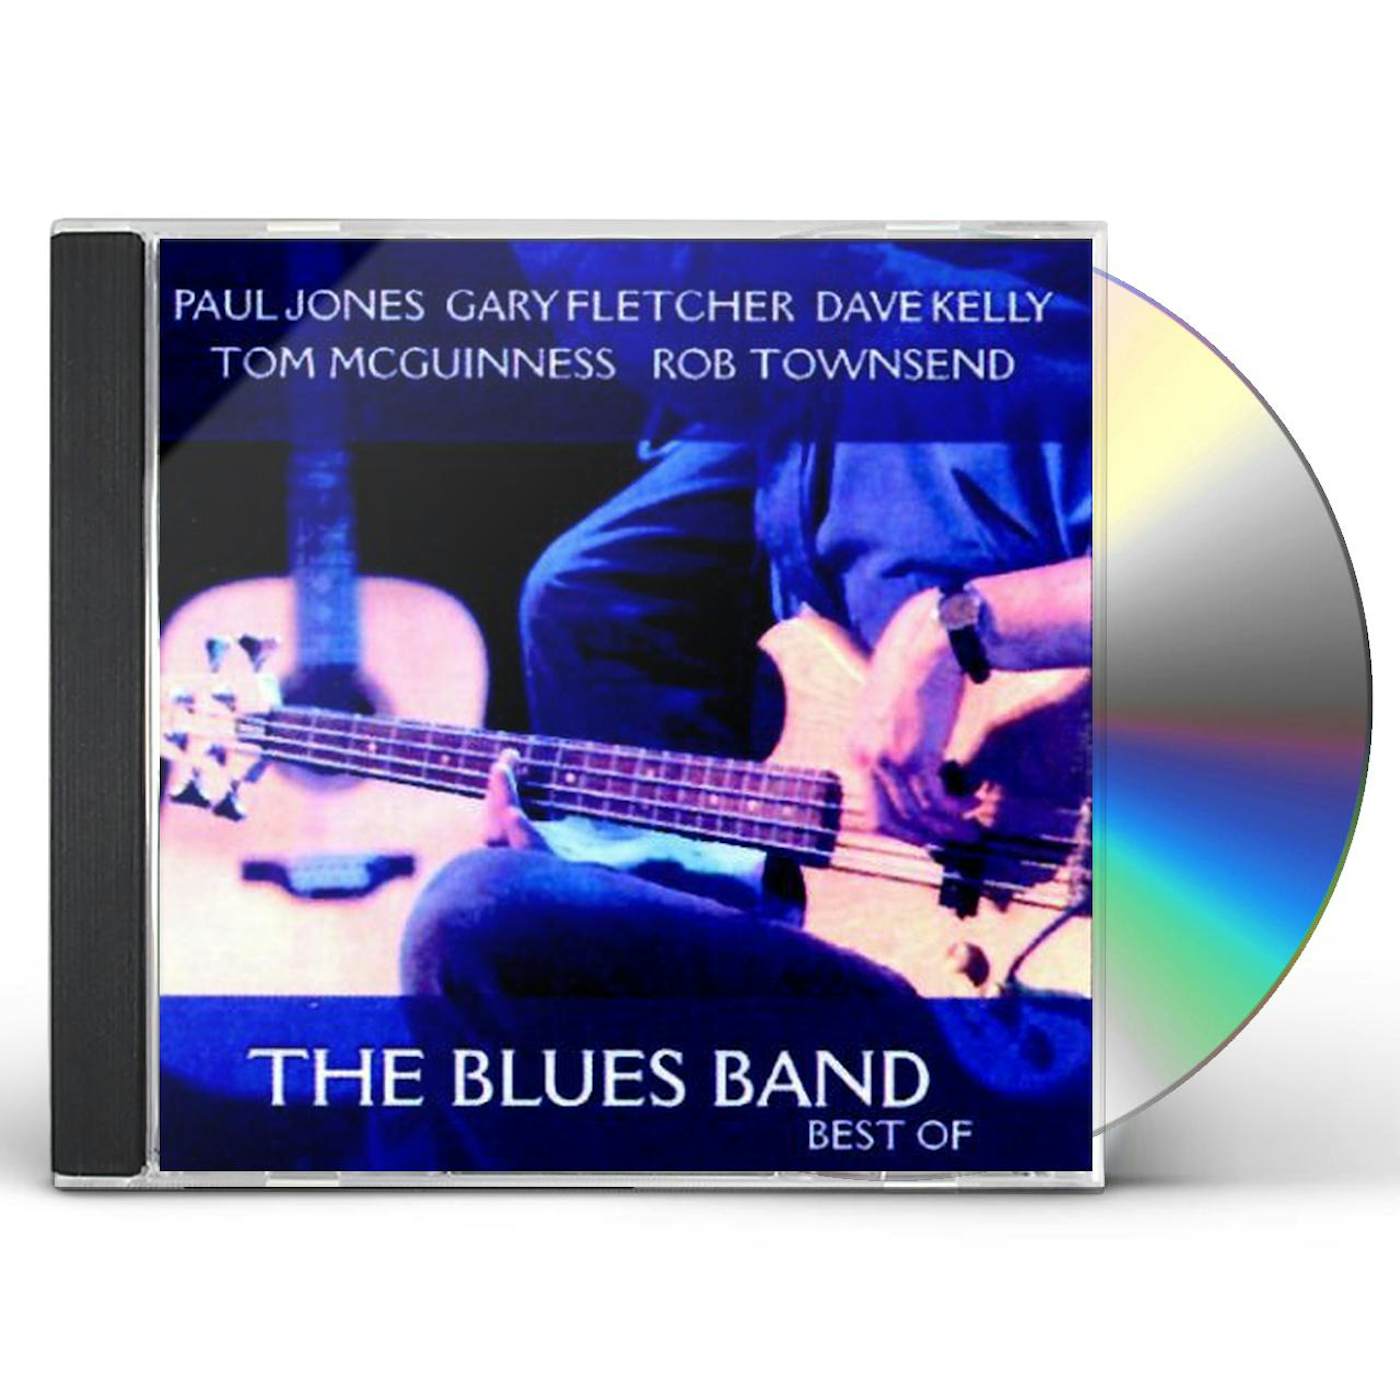 BEST OF The Blues Band CD